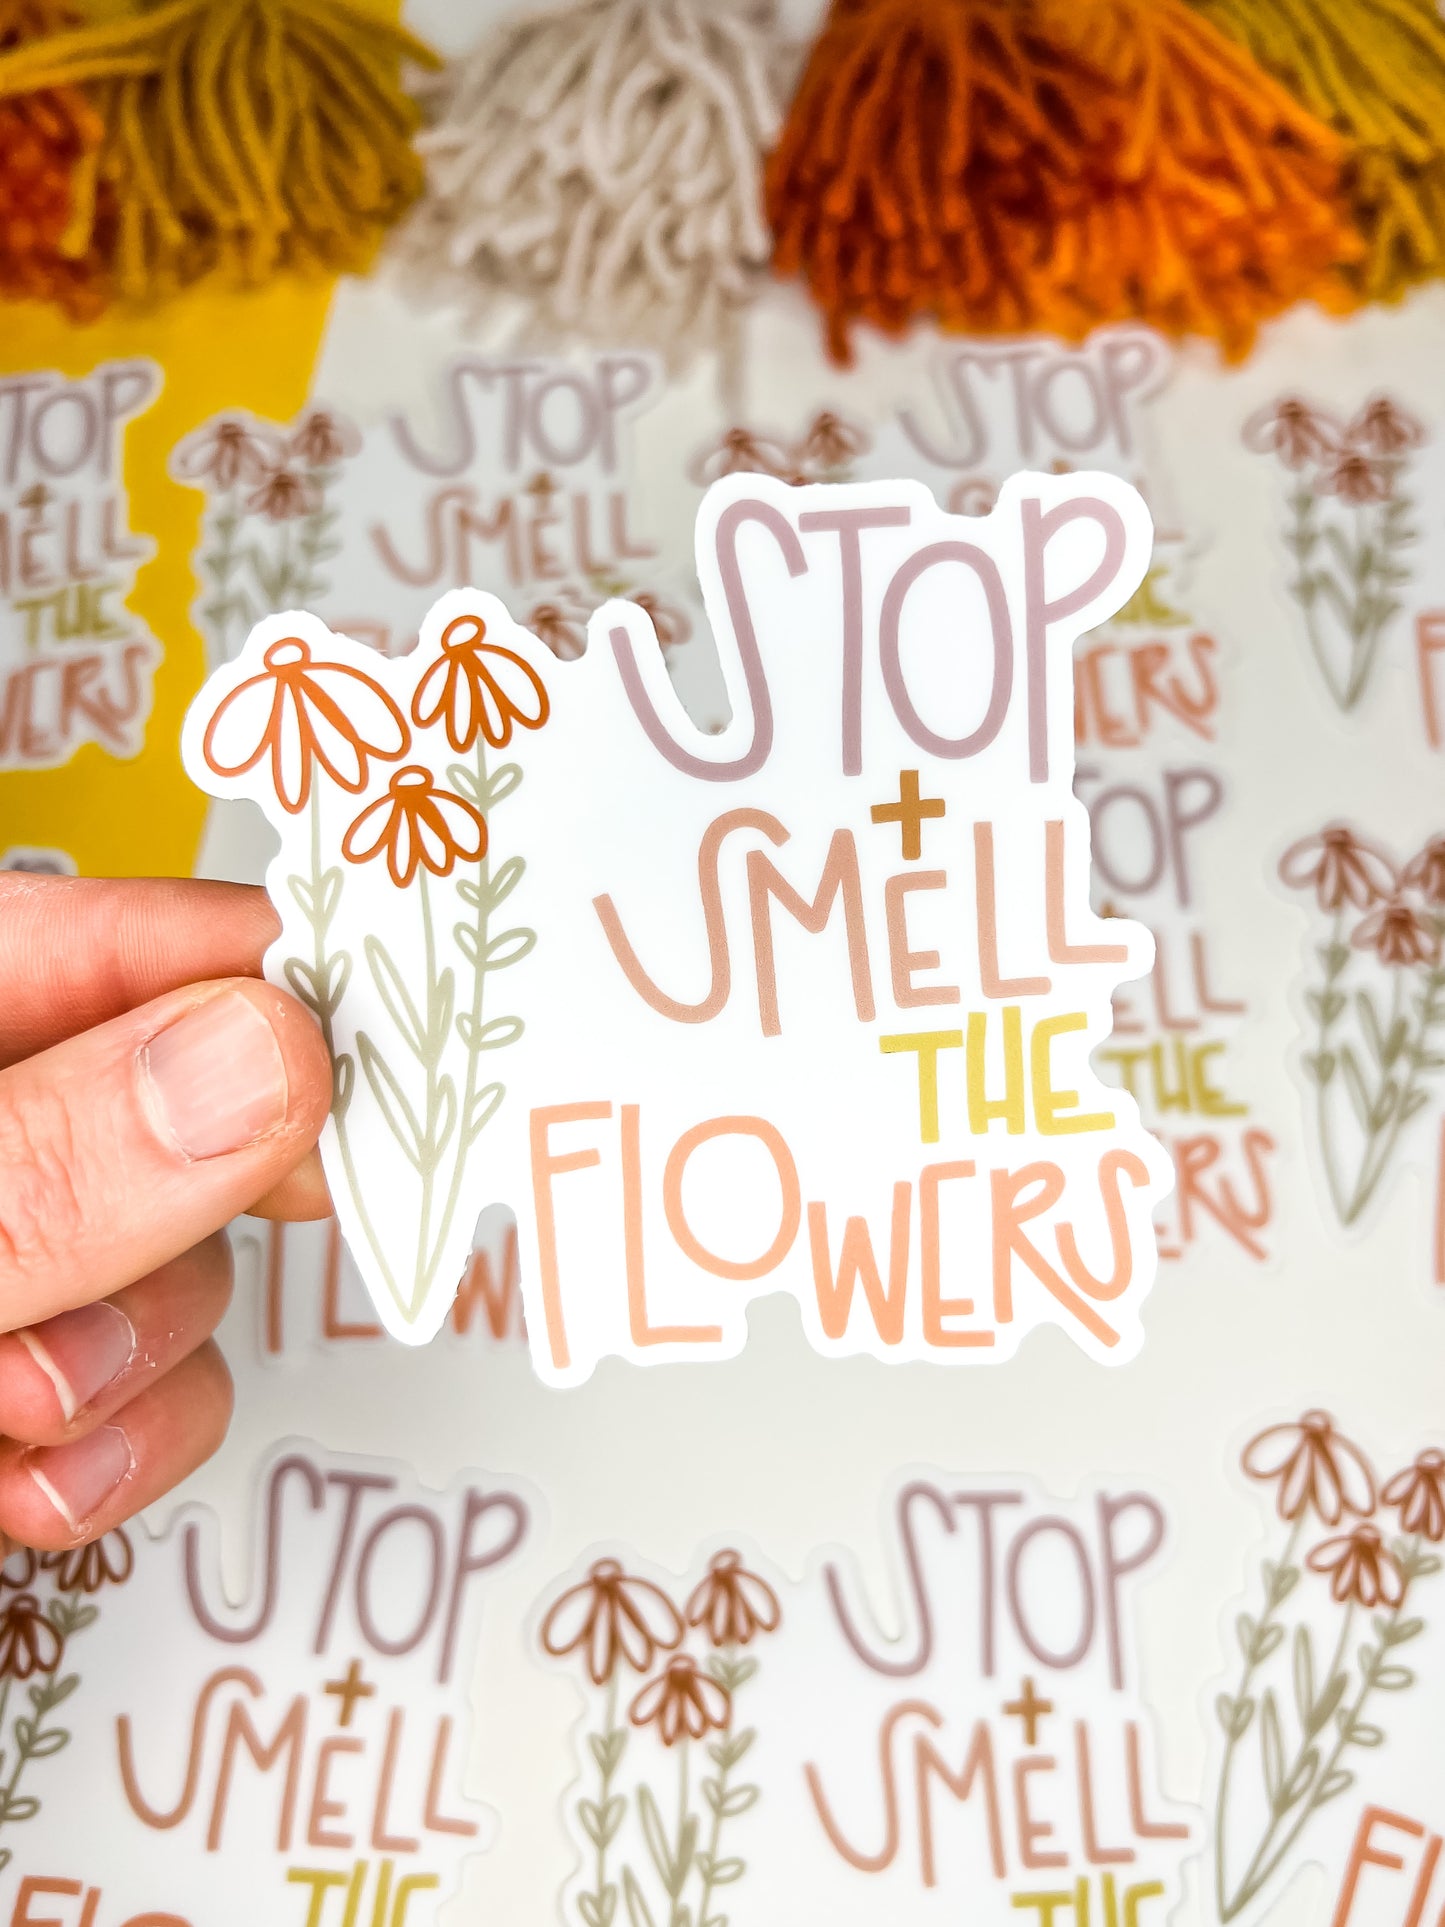 Stop and Smell the Flowers Sticker.